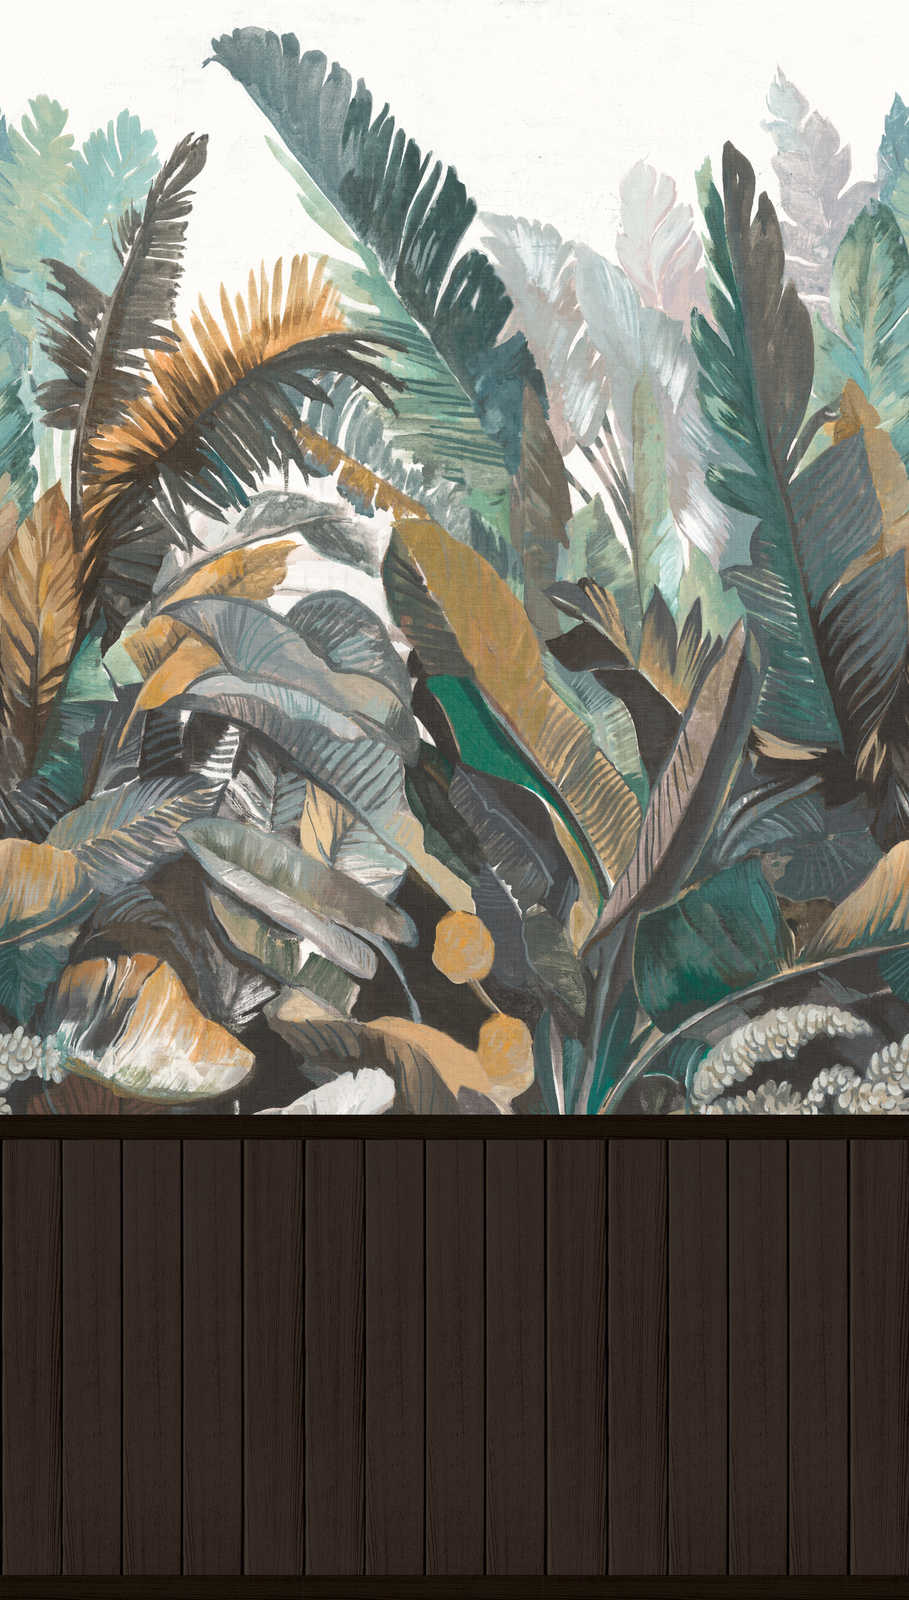             Non-woven motif wallpaper with wood-effect plinth border and jungle pattern - black, green
        